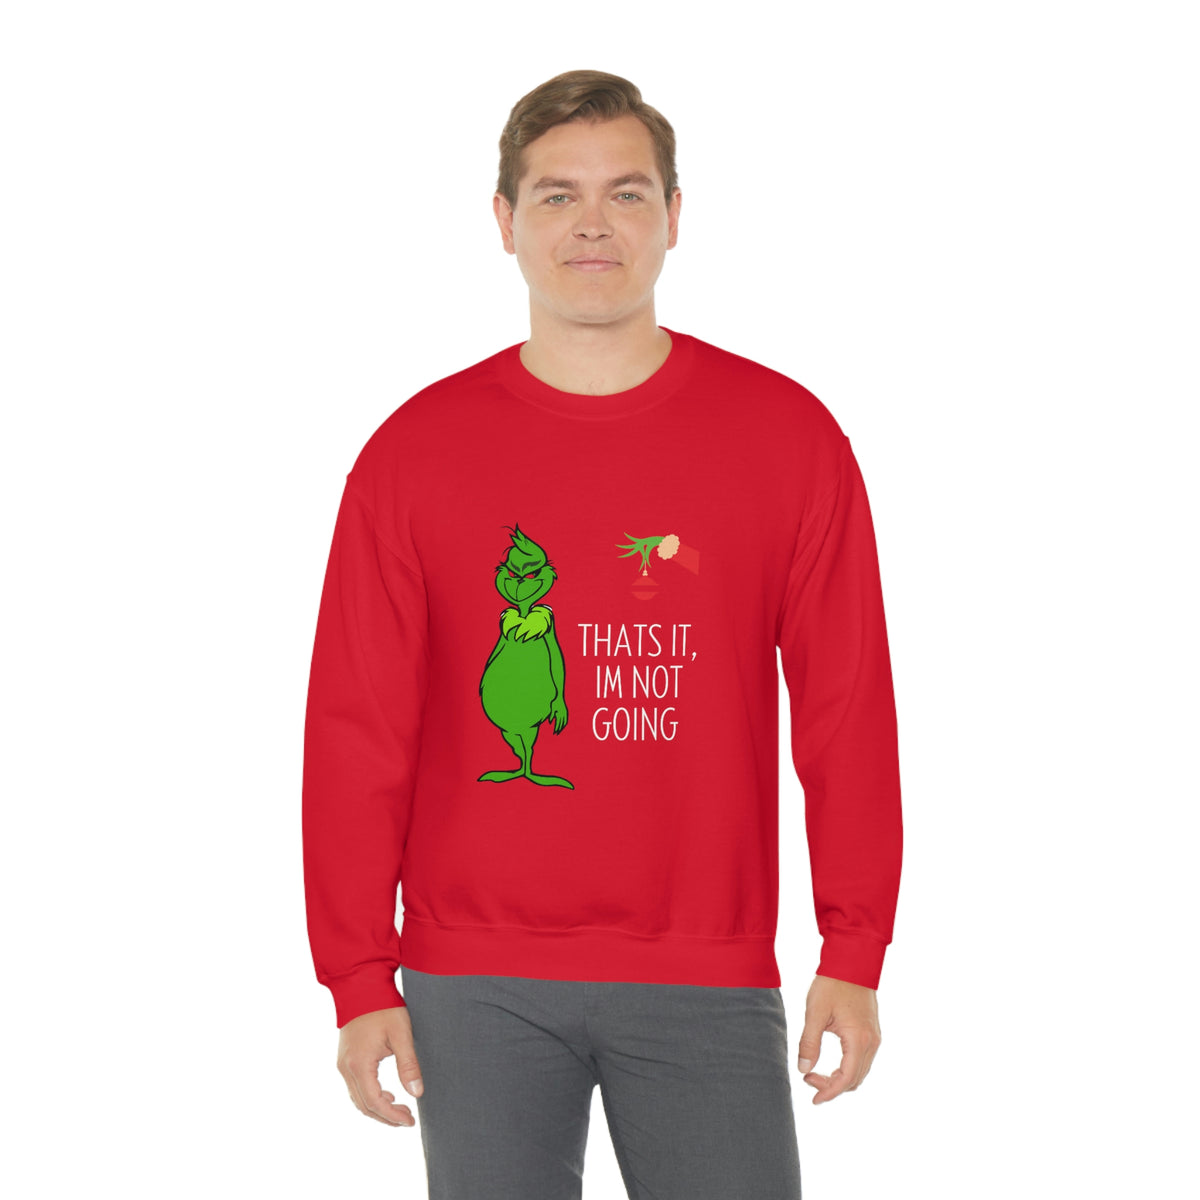 That's it I'm Not Going Top, The Grinch Sweatshirt, The Grinch Christmas, Holiday Gifts, Comfy Holiday Sweateshirts